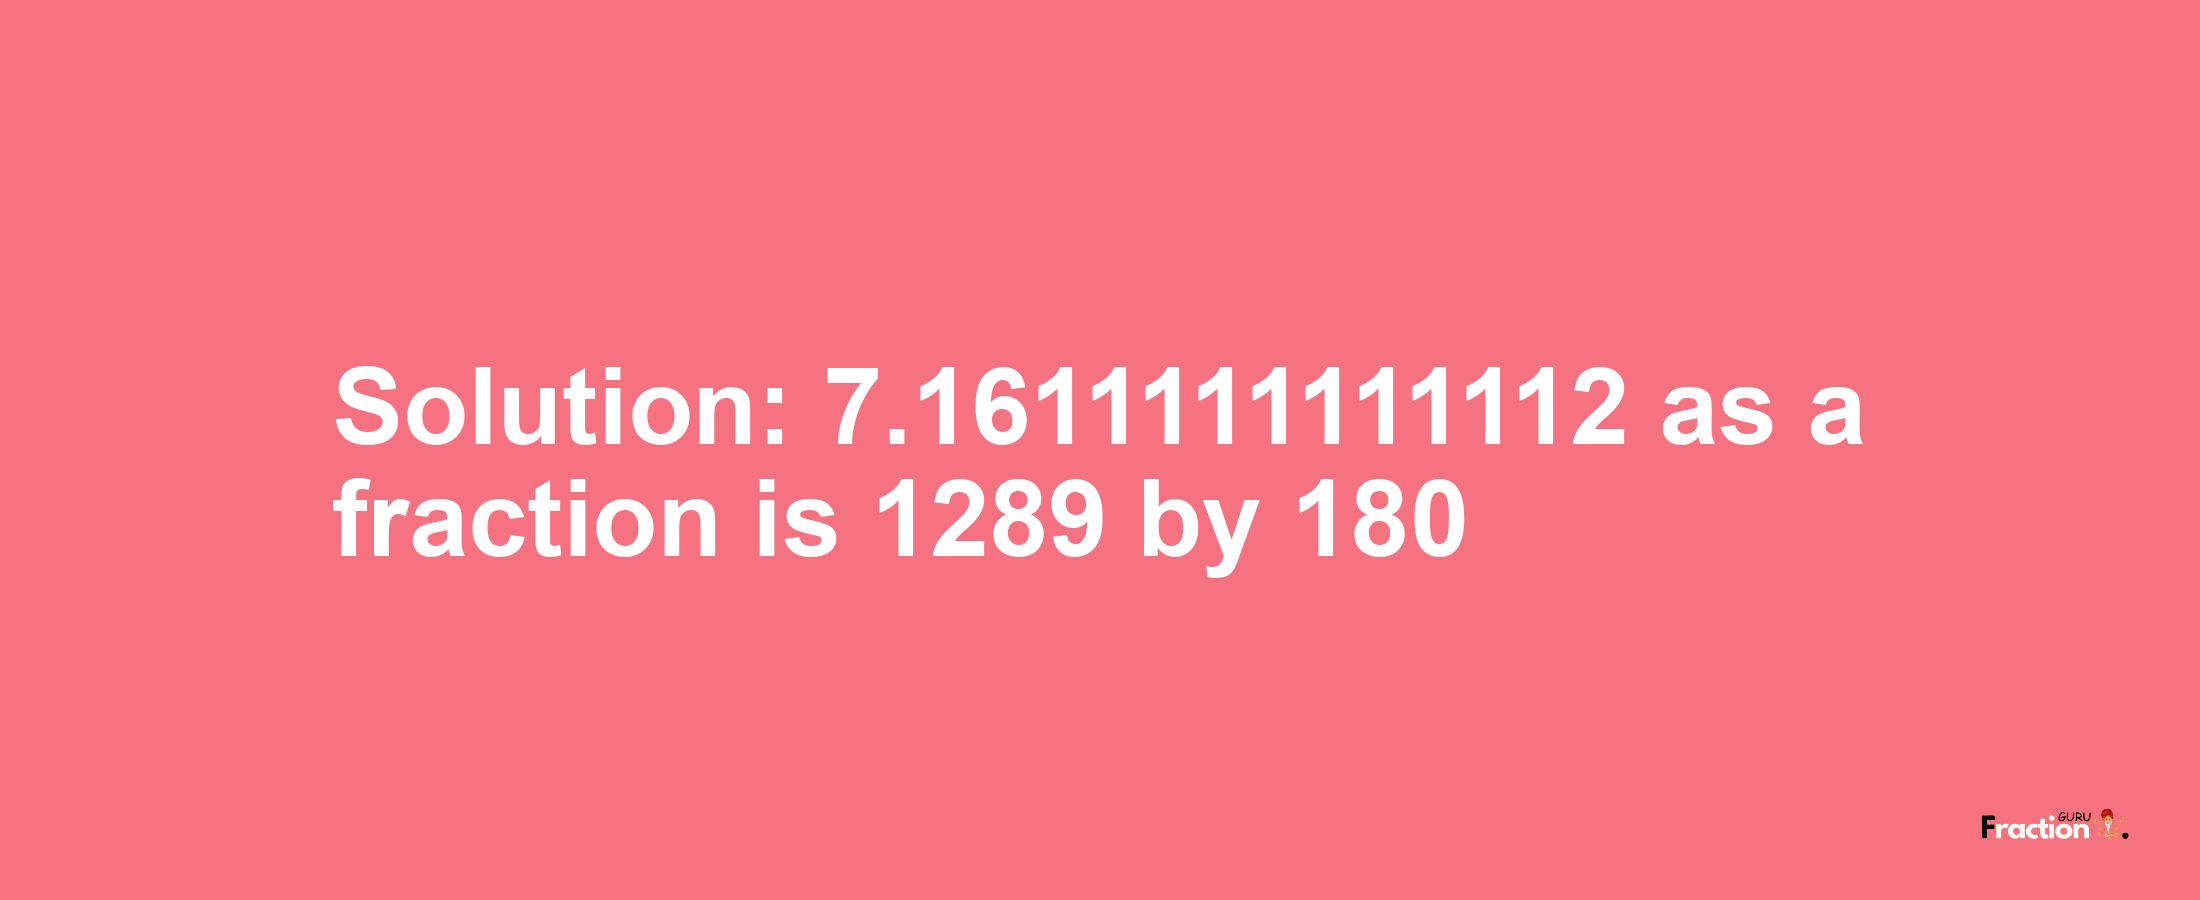 Solution:7.1611111111112 as a fraction is 1289/180